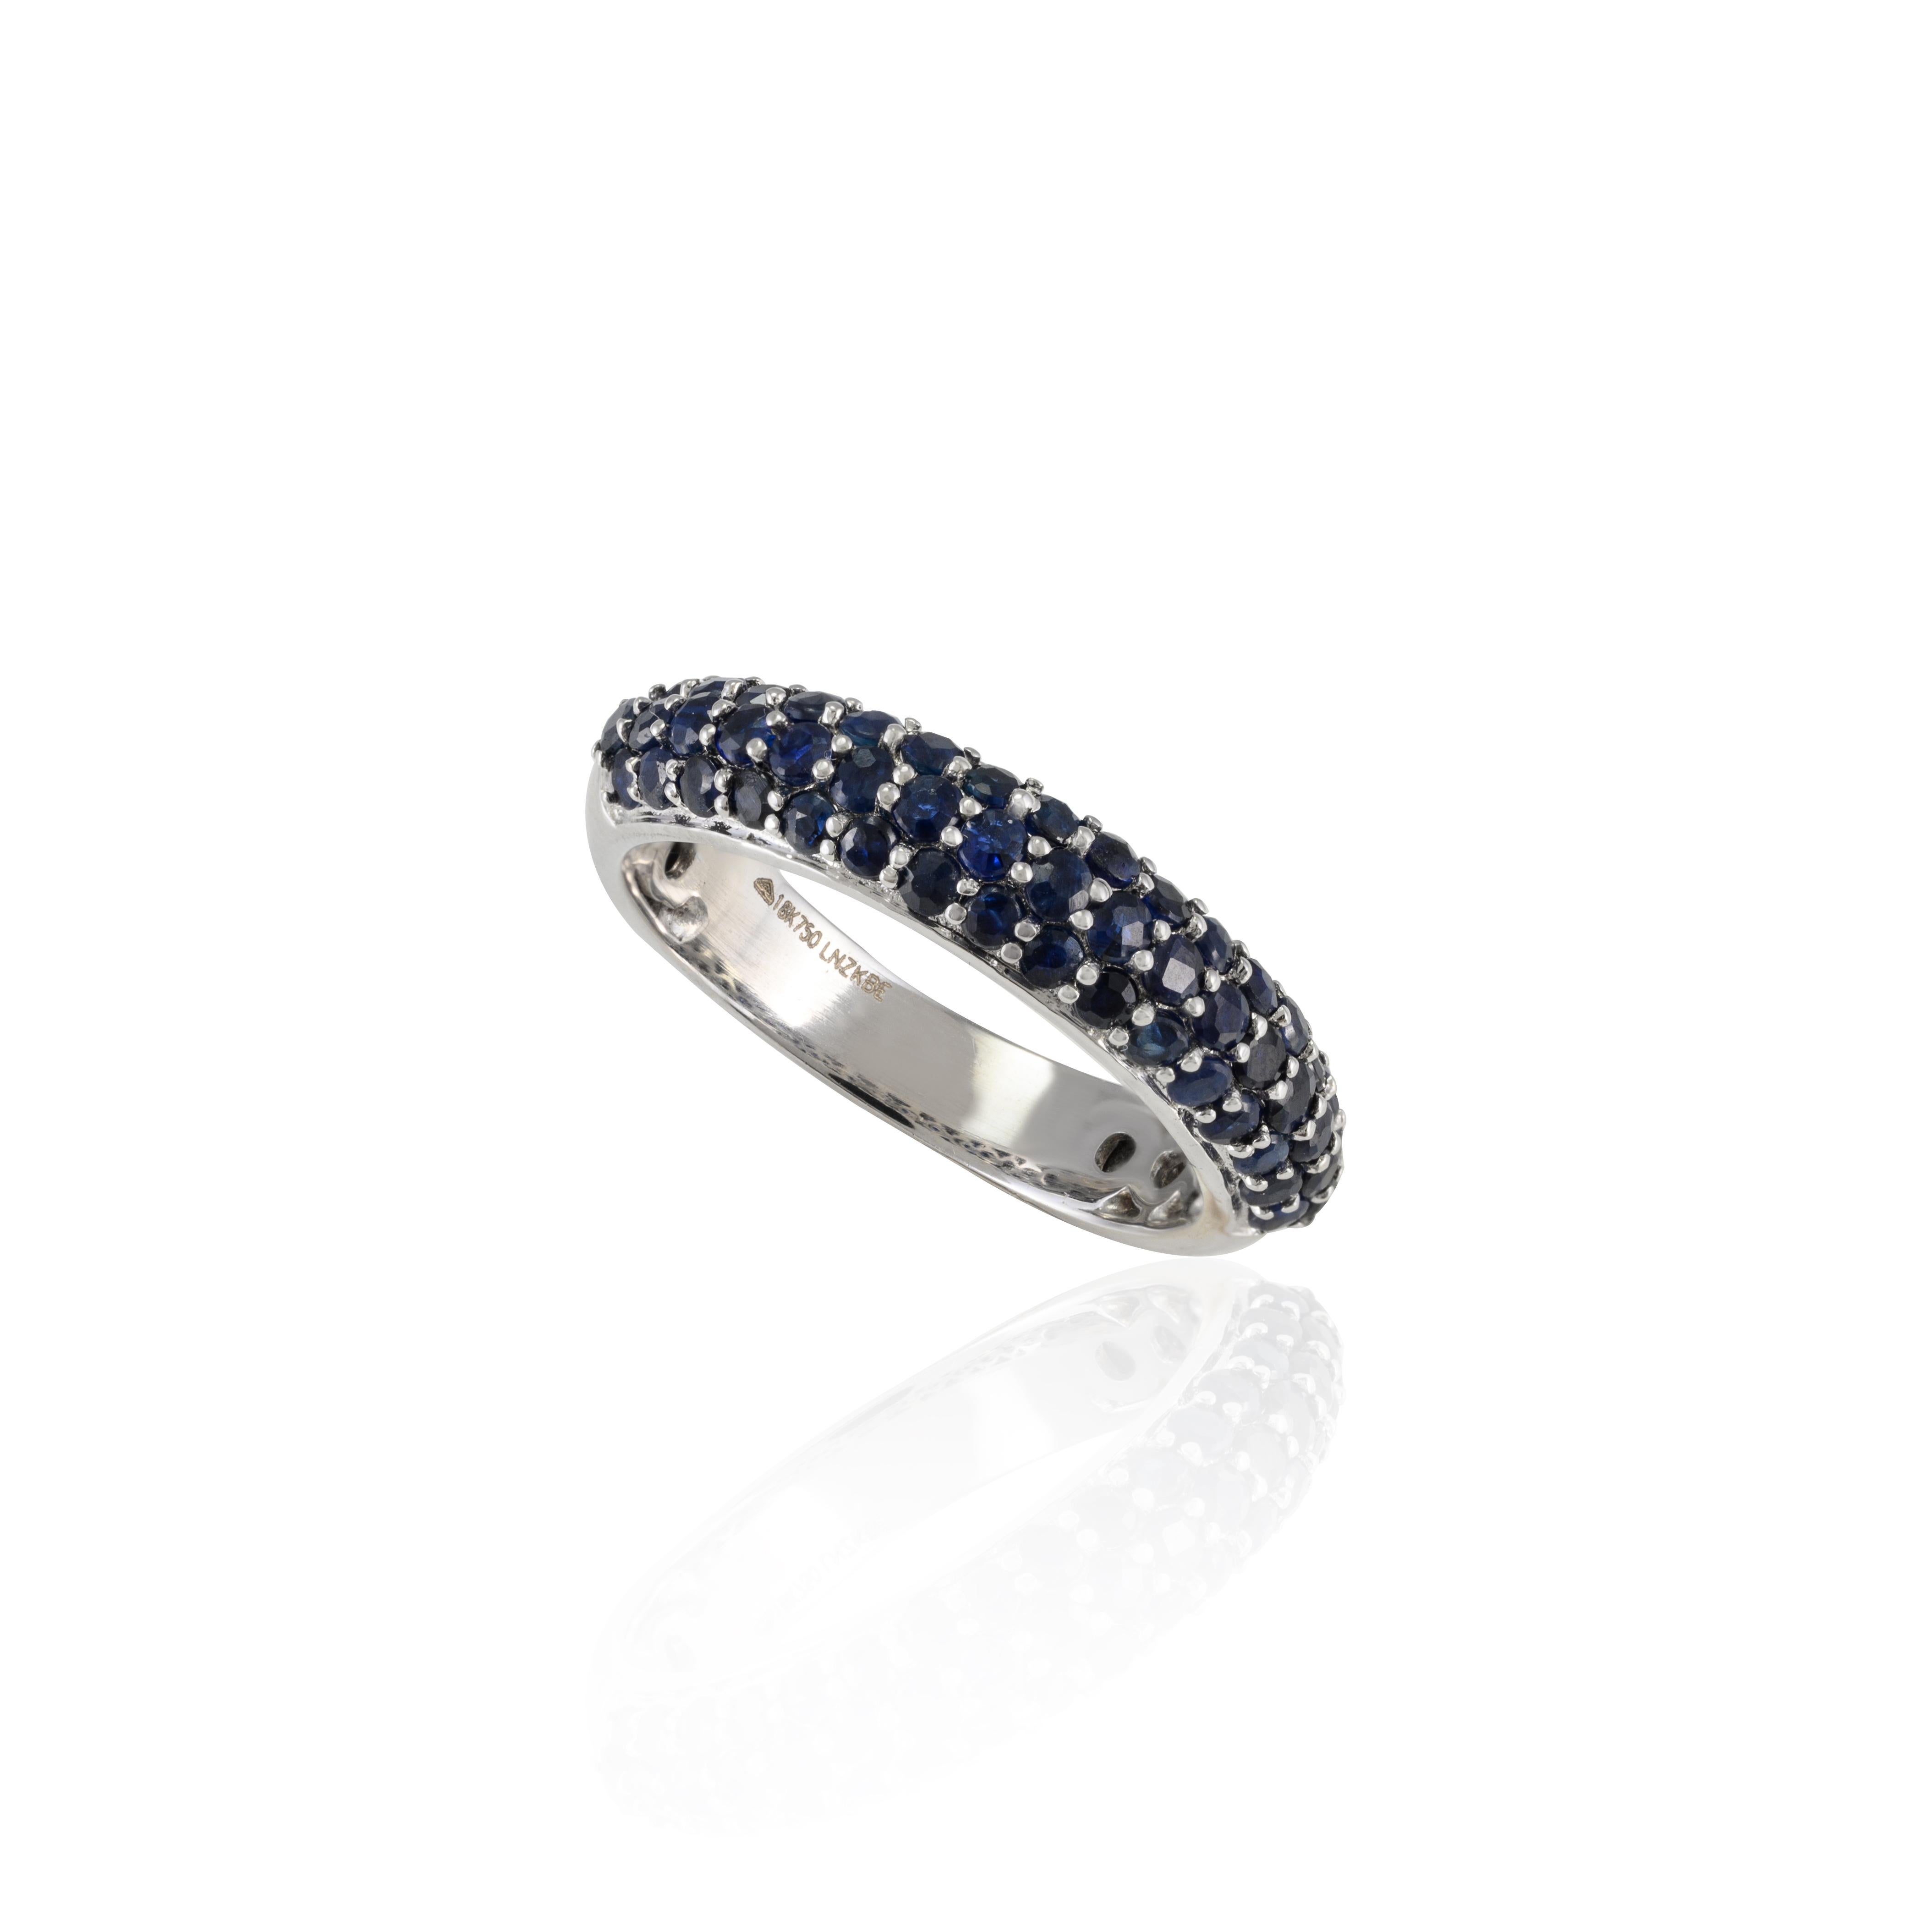 For Sale:  18k Solid White Gold 1.3 Ct Pave Set Deep Blue Sapphire Dome Ring Eternity Band  5